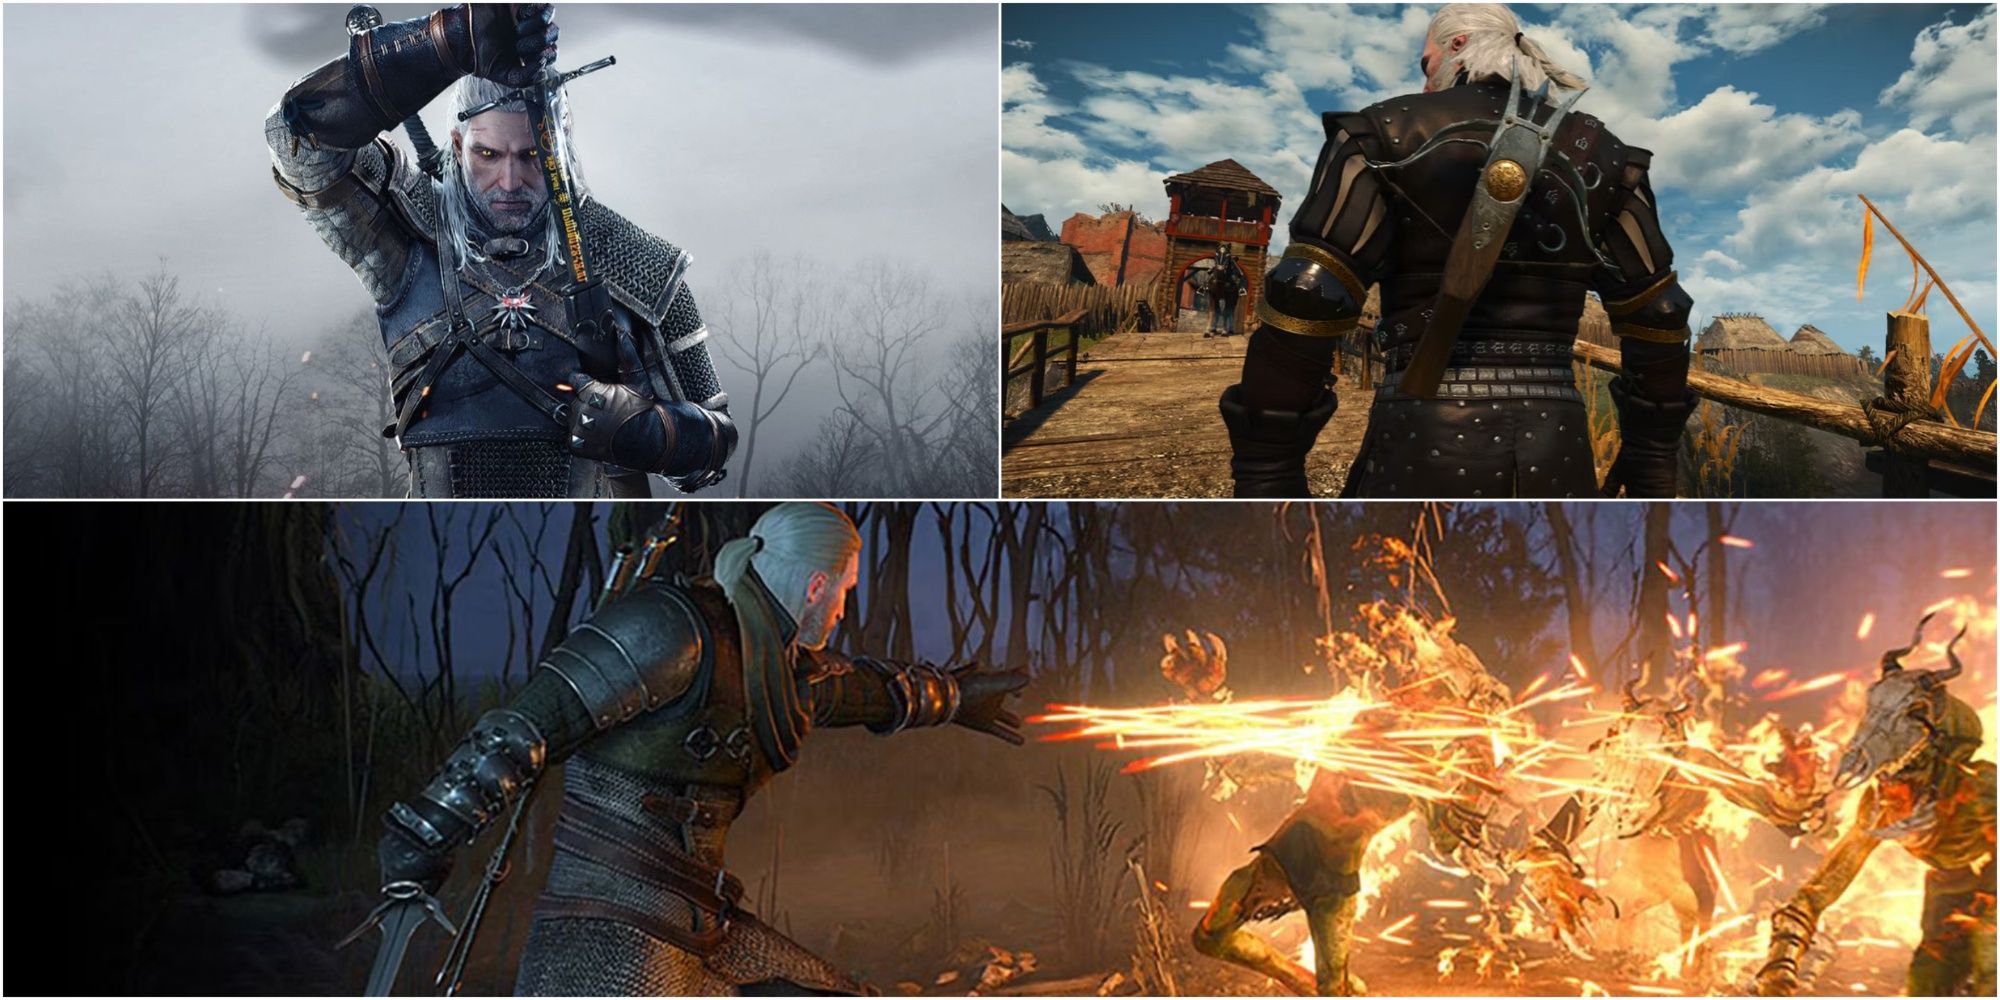 Geralt with a sword, a crossbow and casting igni firestream